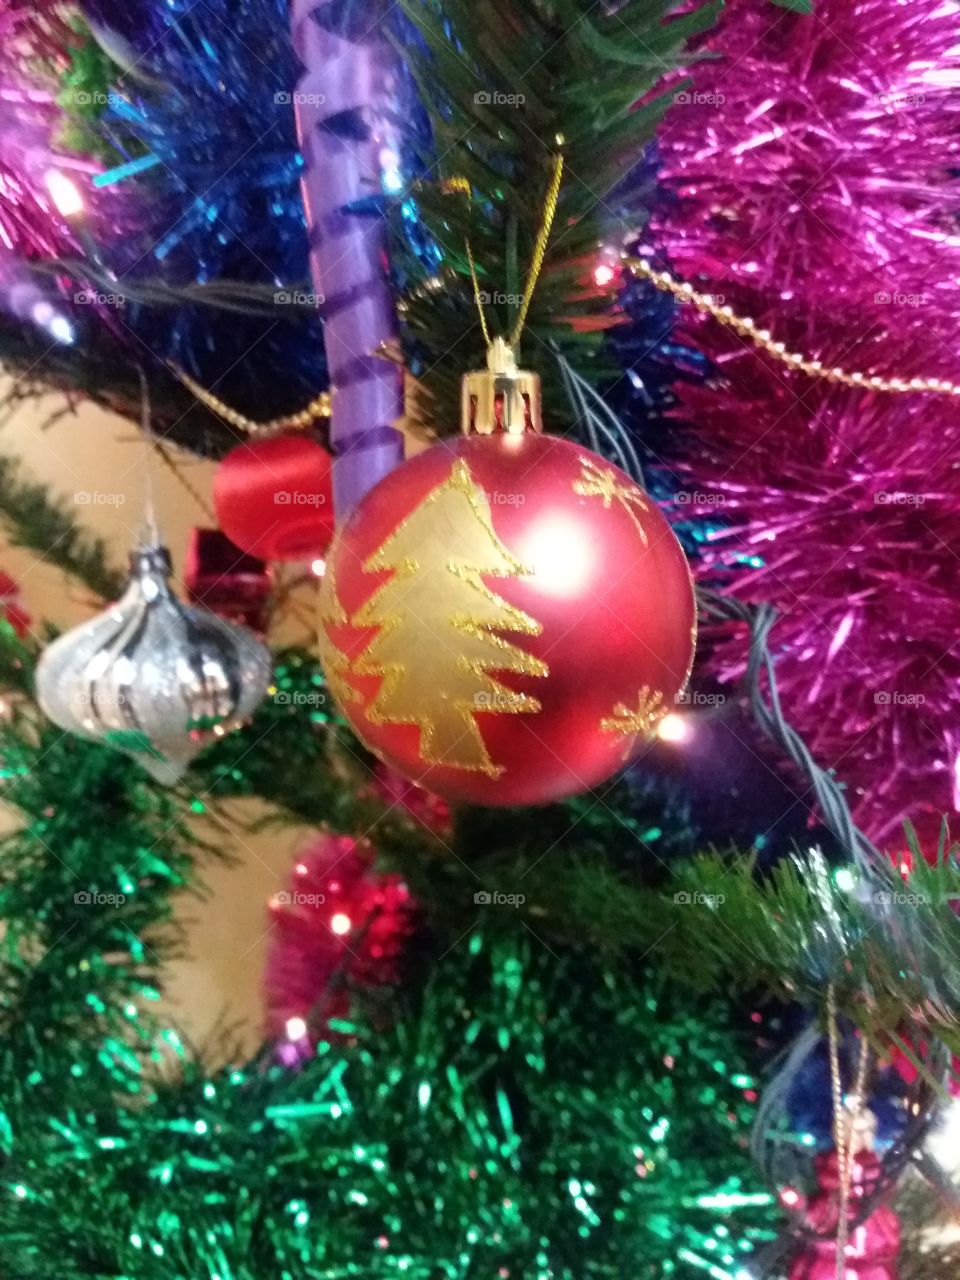 New Year and Christmas tree decoration. Increases joy of the people.